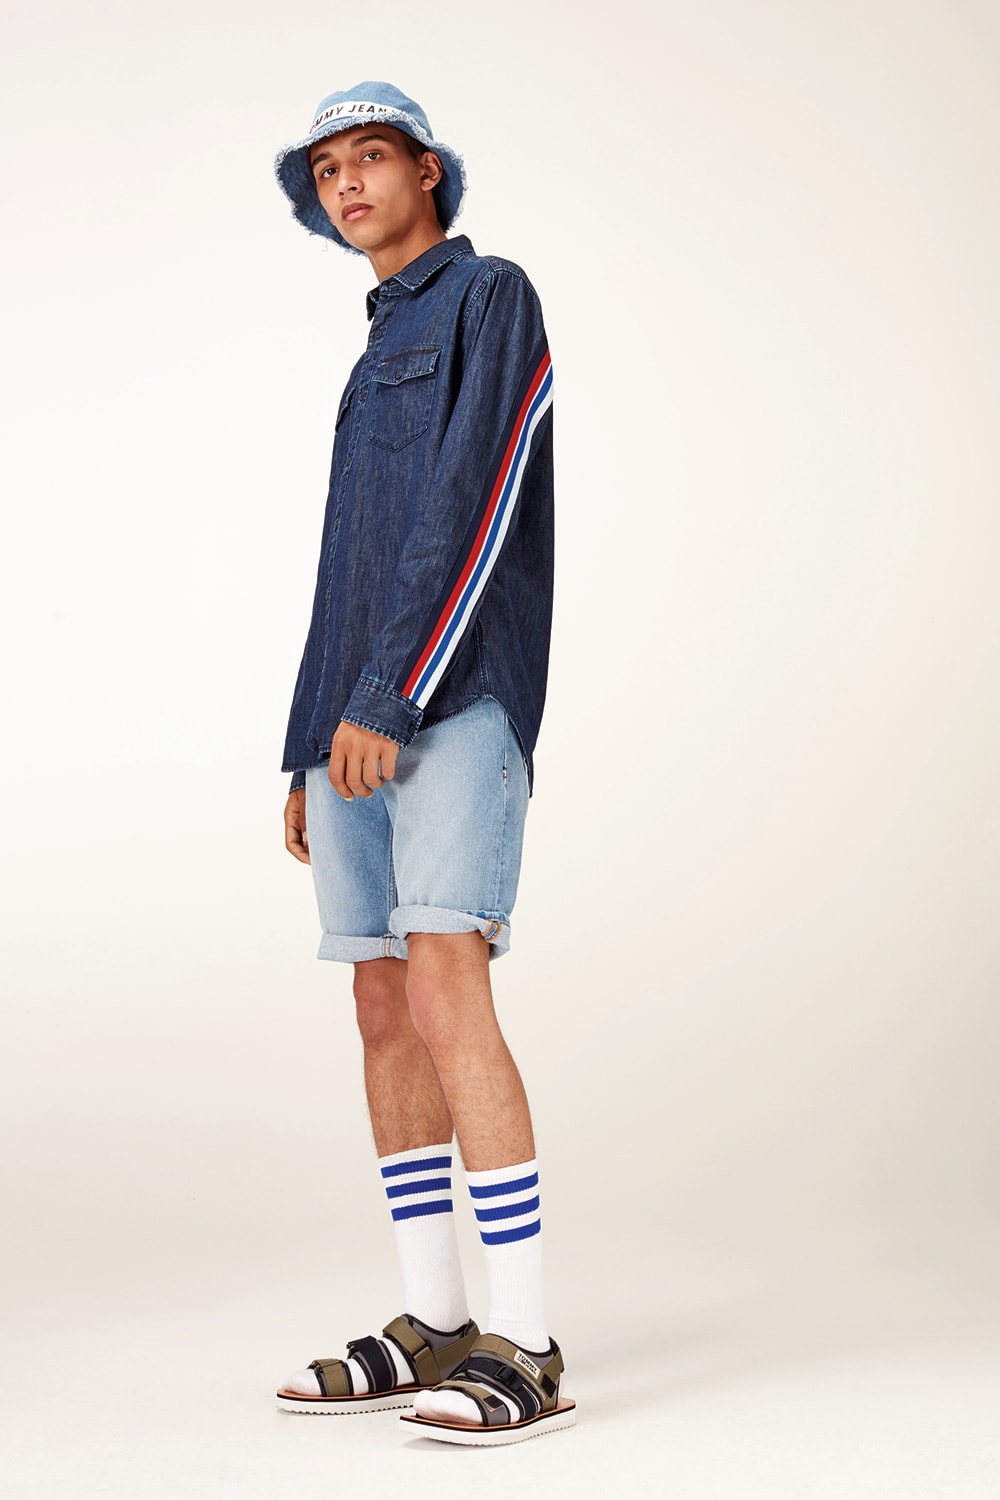 Tommy Jeans Spring Summer 2018 Collection lookbook tommy hilfiger